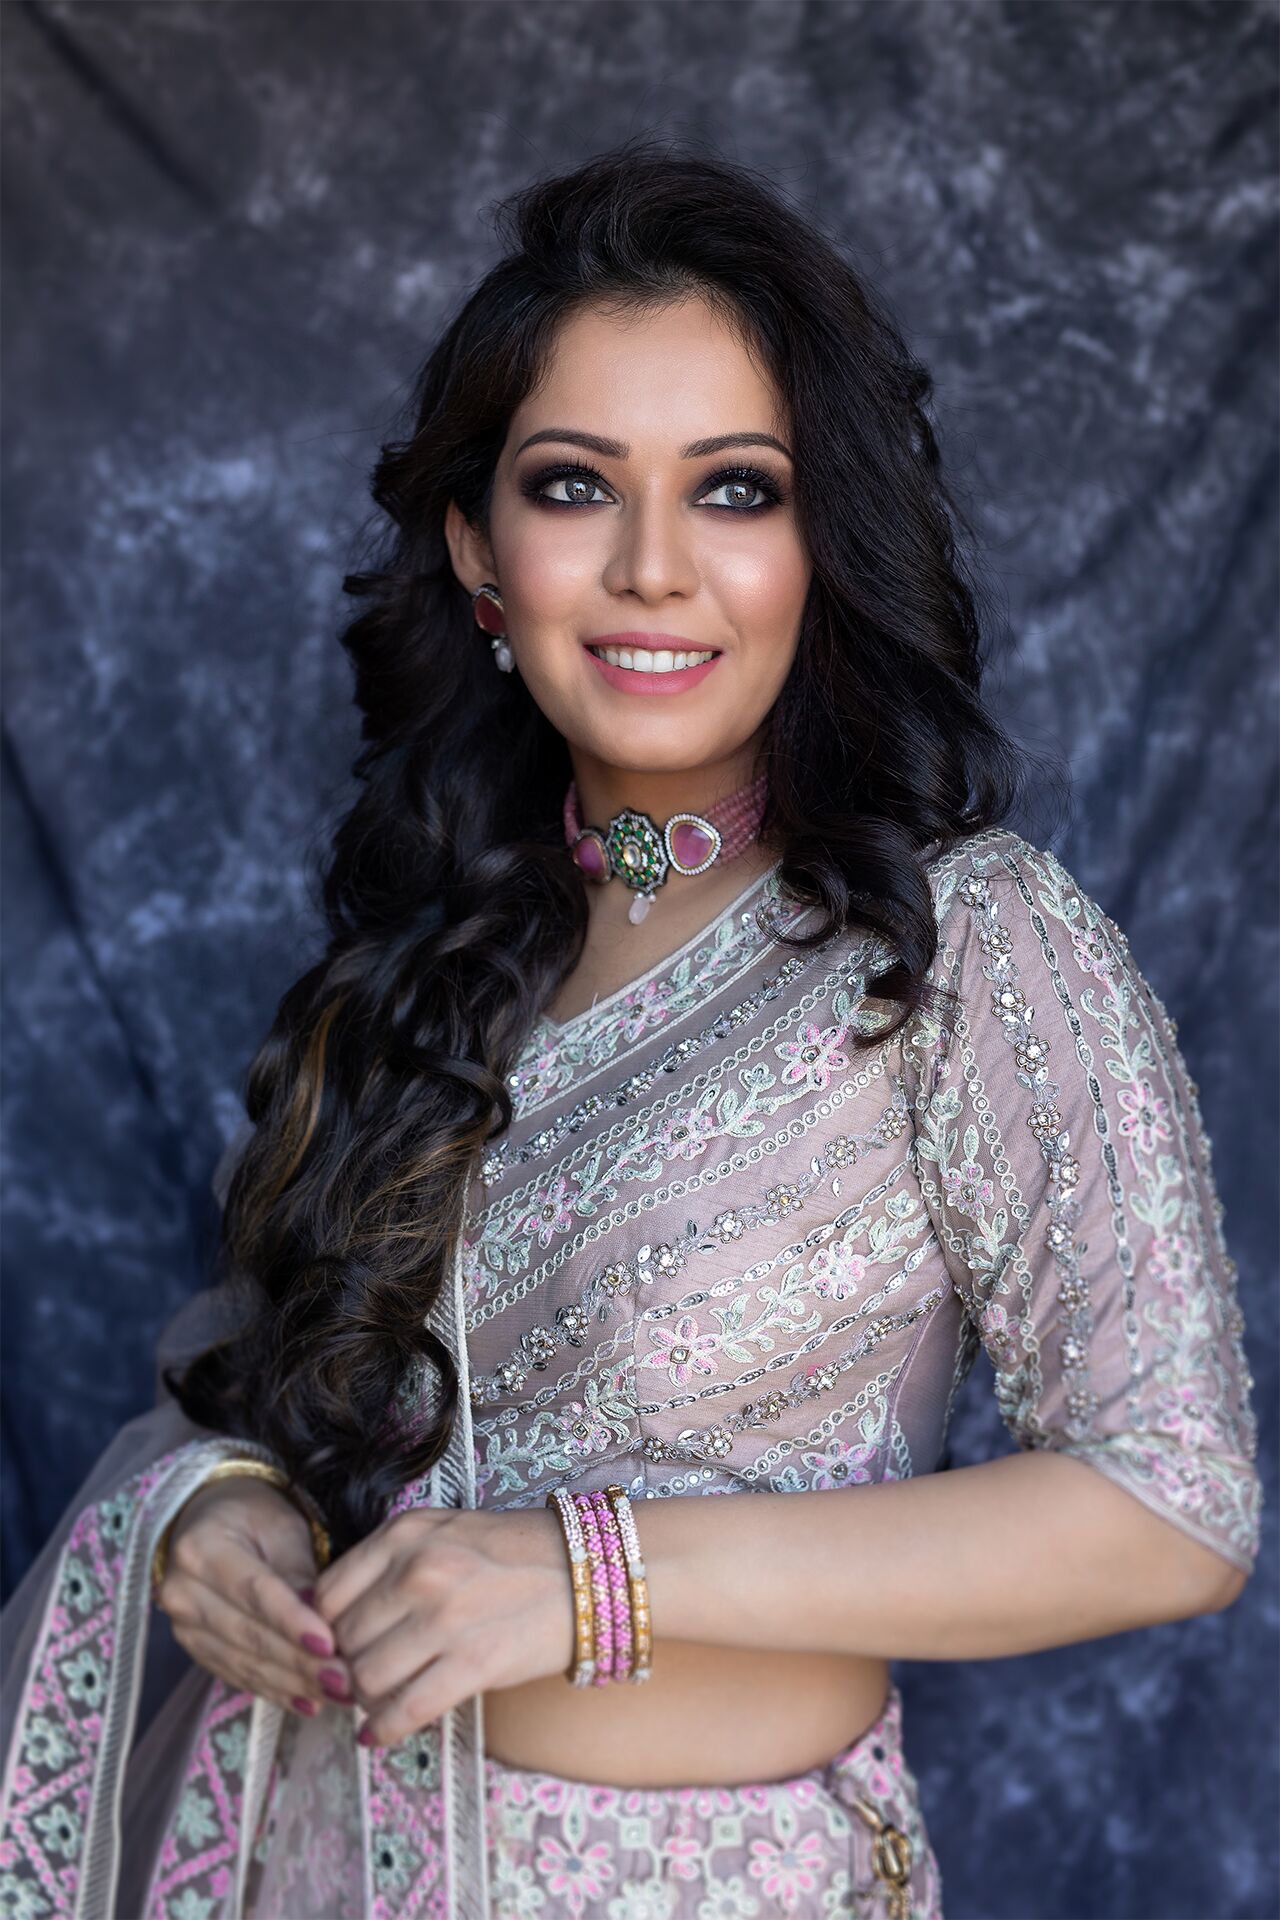 Sujata Gawali Makeup And Hairstyle Academy in Vadgaon Sheri,Pune - Best  Makeup Artists in Pune - Justdial